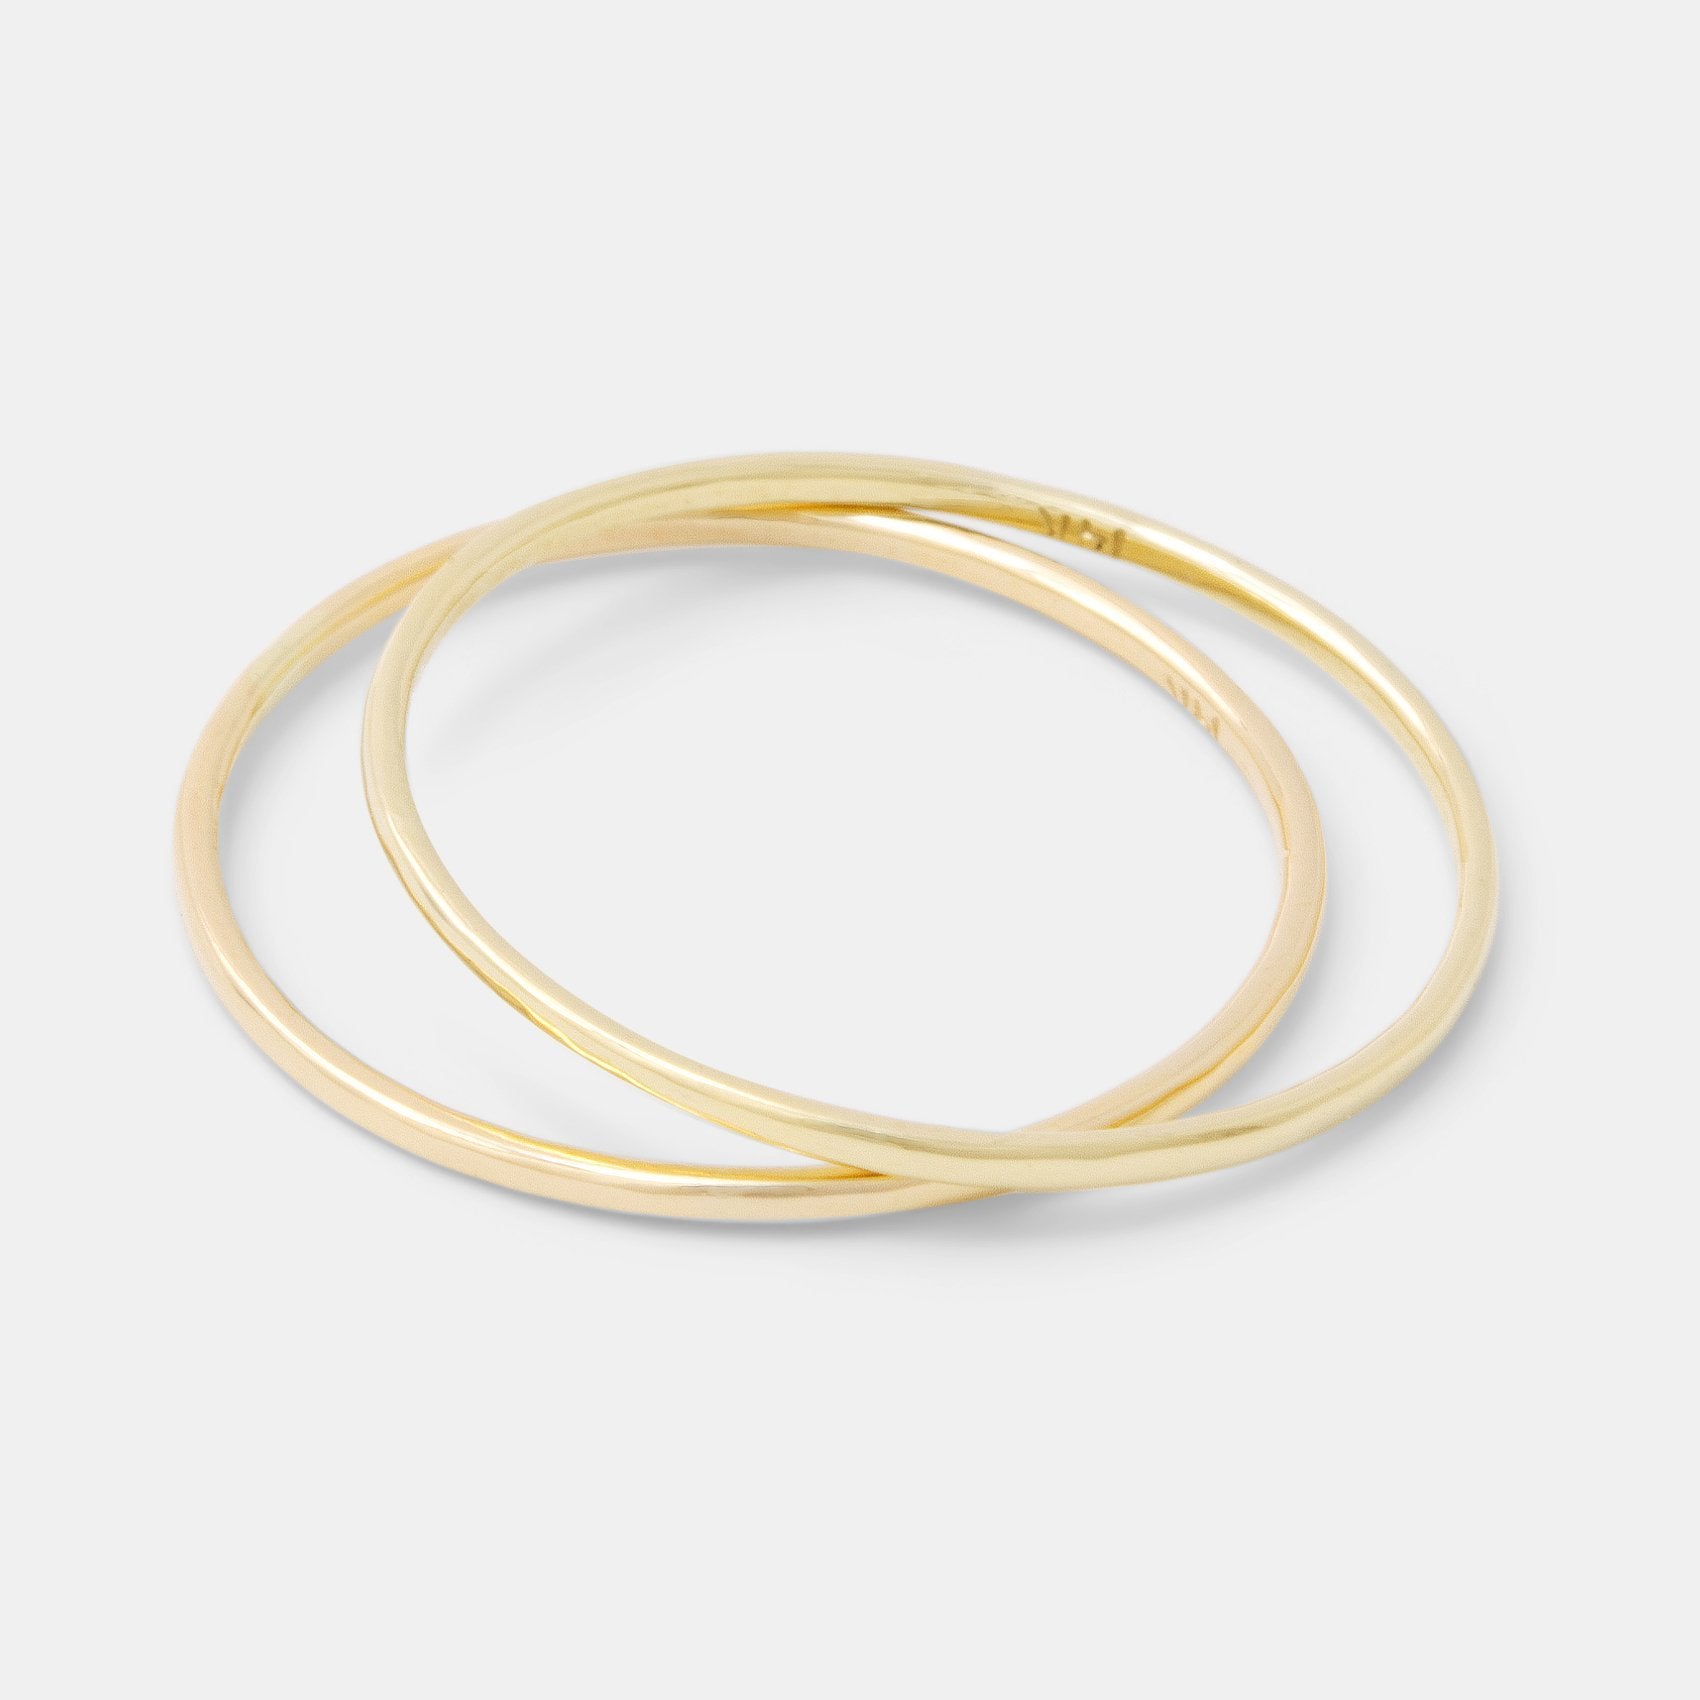 Solid gold stacking rings set - Simone Walsh Jewellery Australia